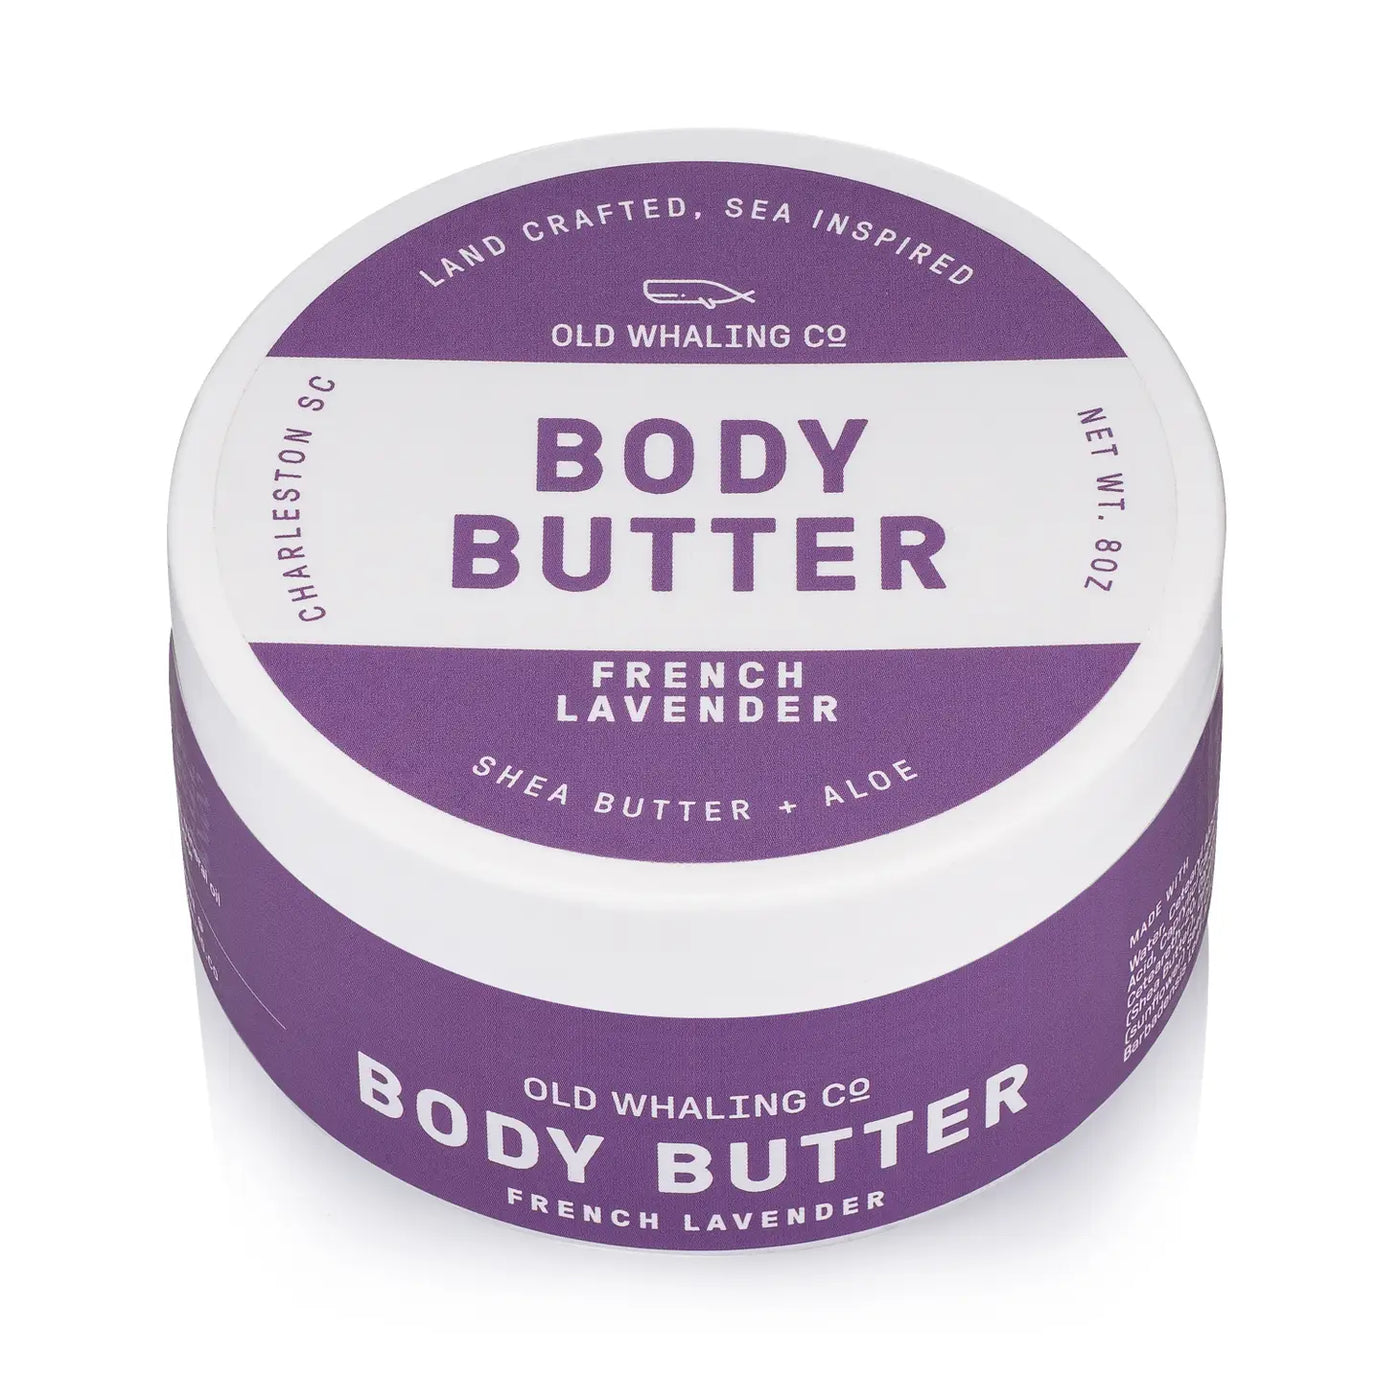 8oz Body Butter French Lavender